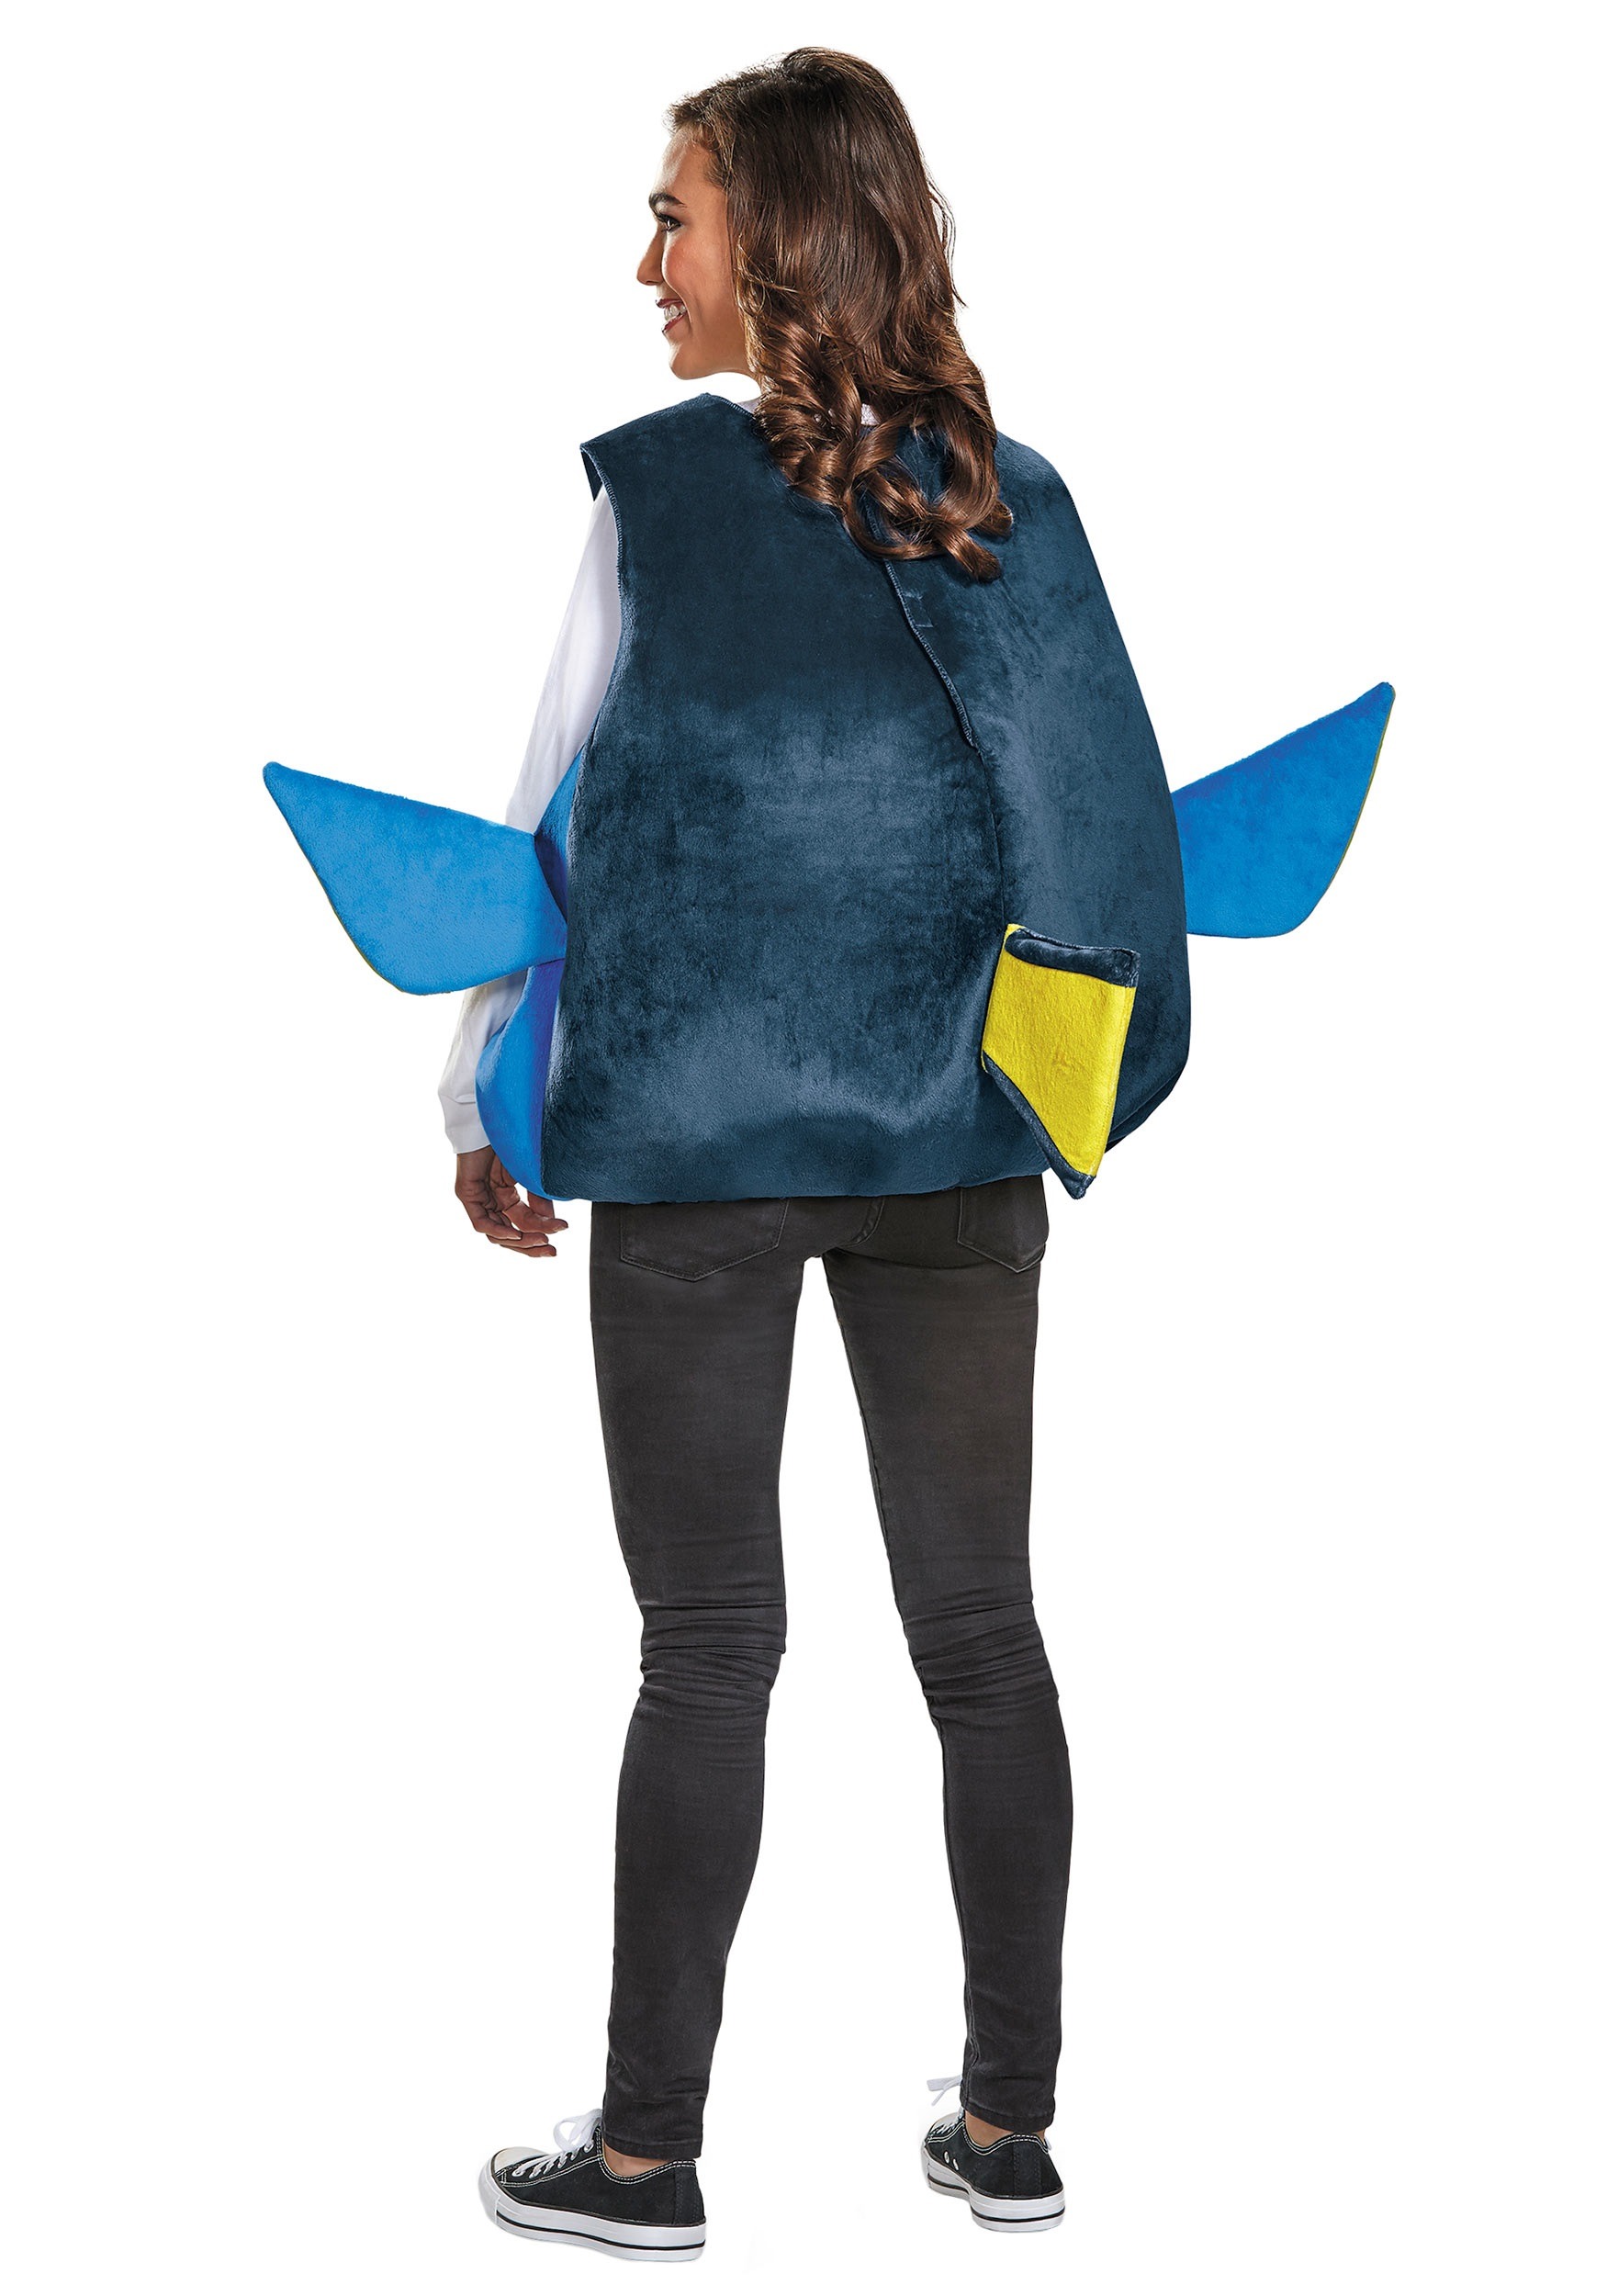 https://images.halloweencostumes.ca/products/39504/2-1-72988/dory-adult-fish-costume1.jpg